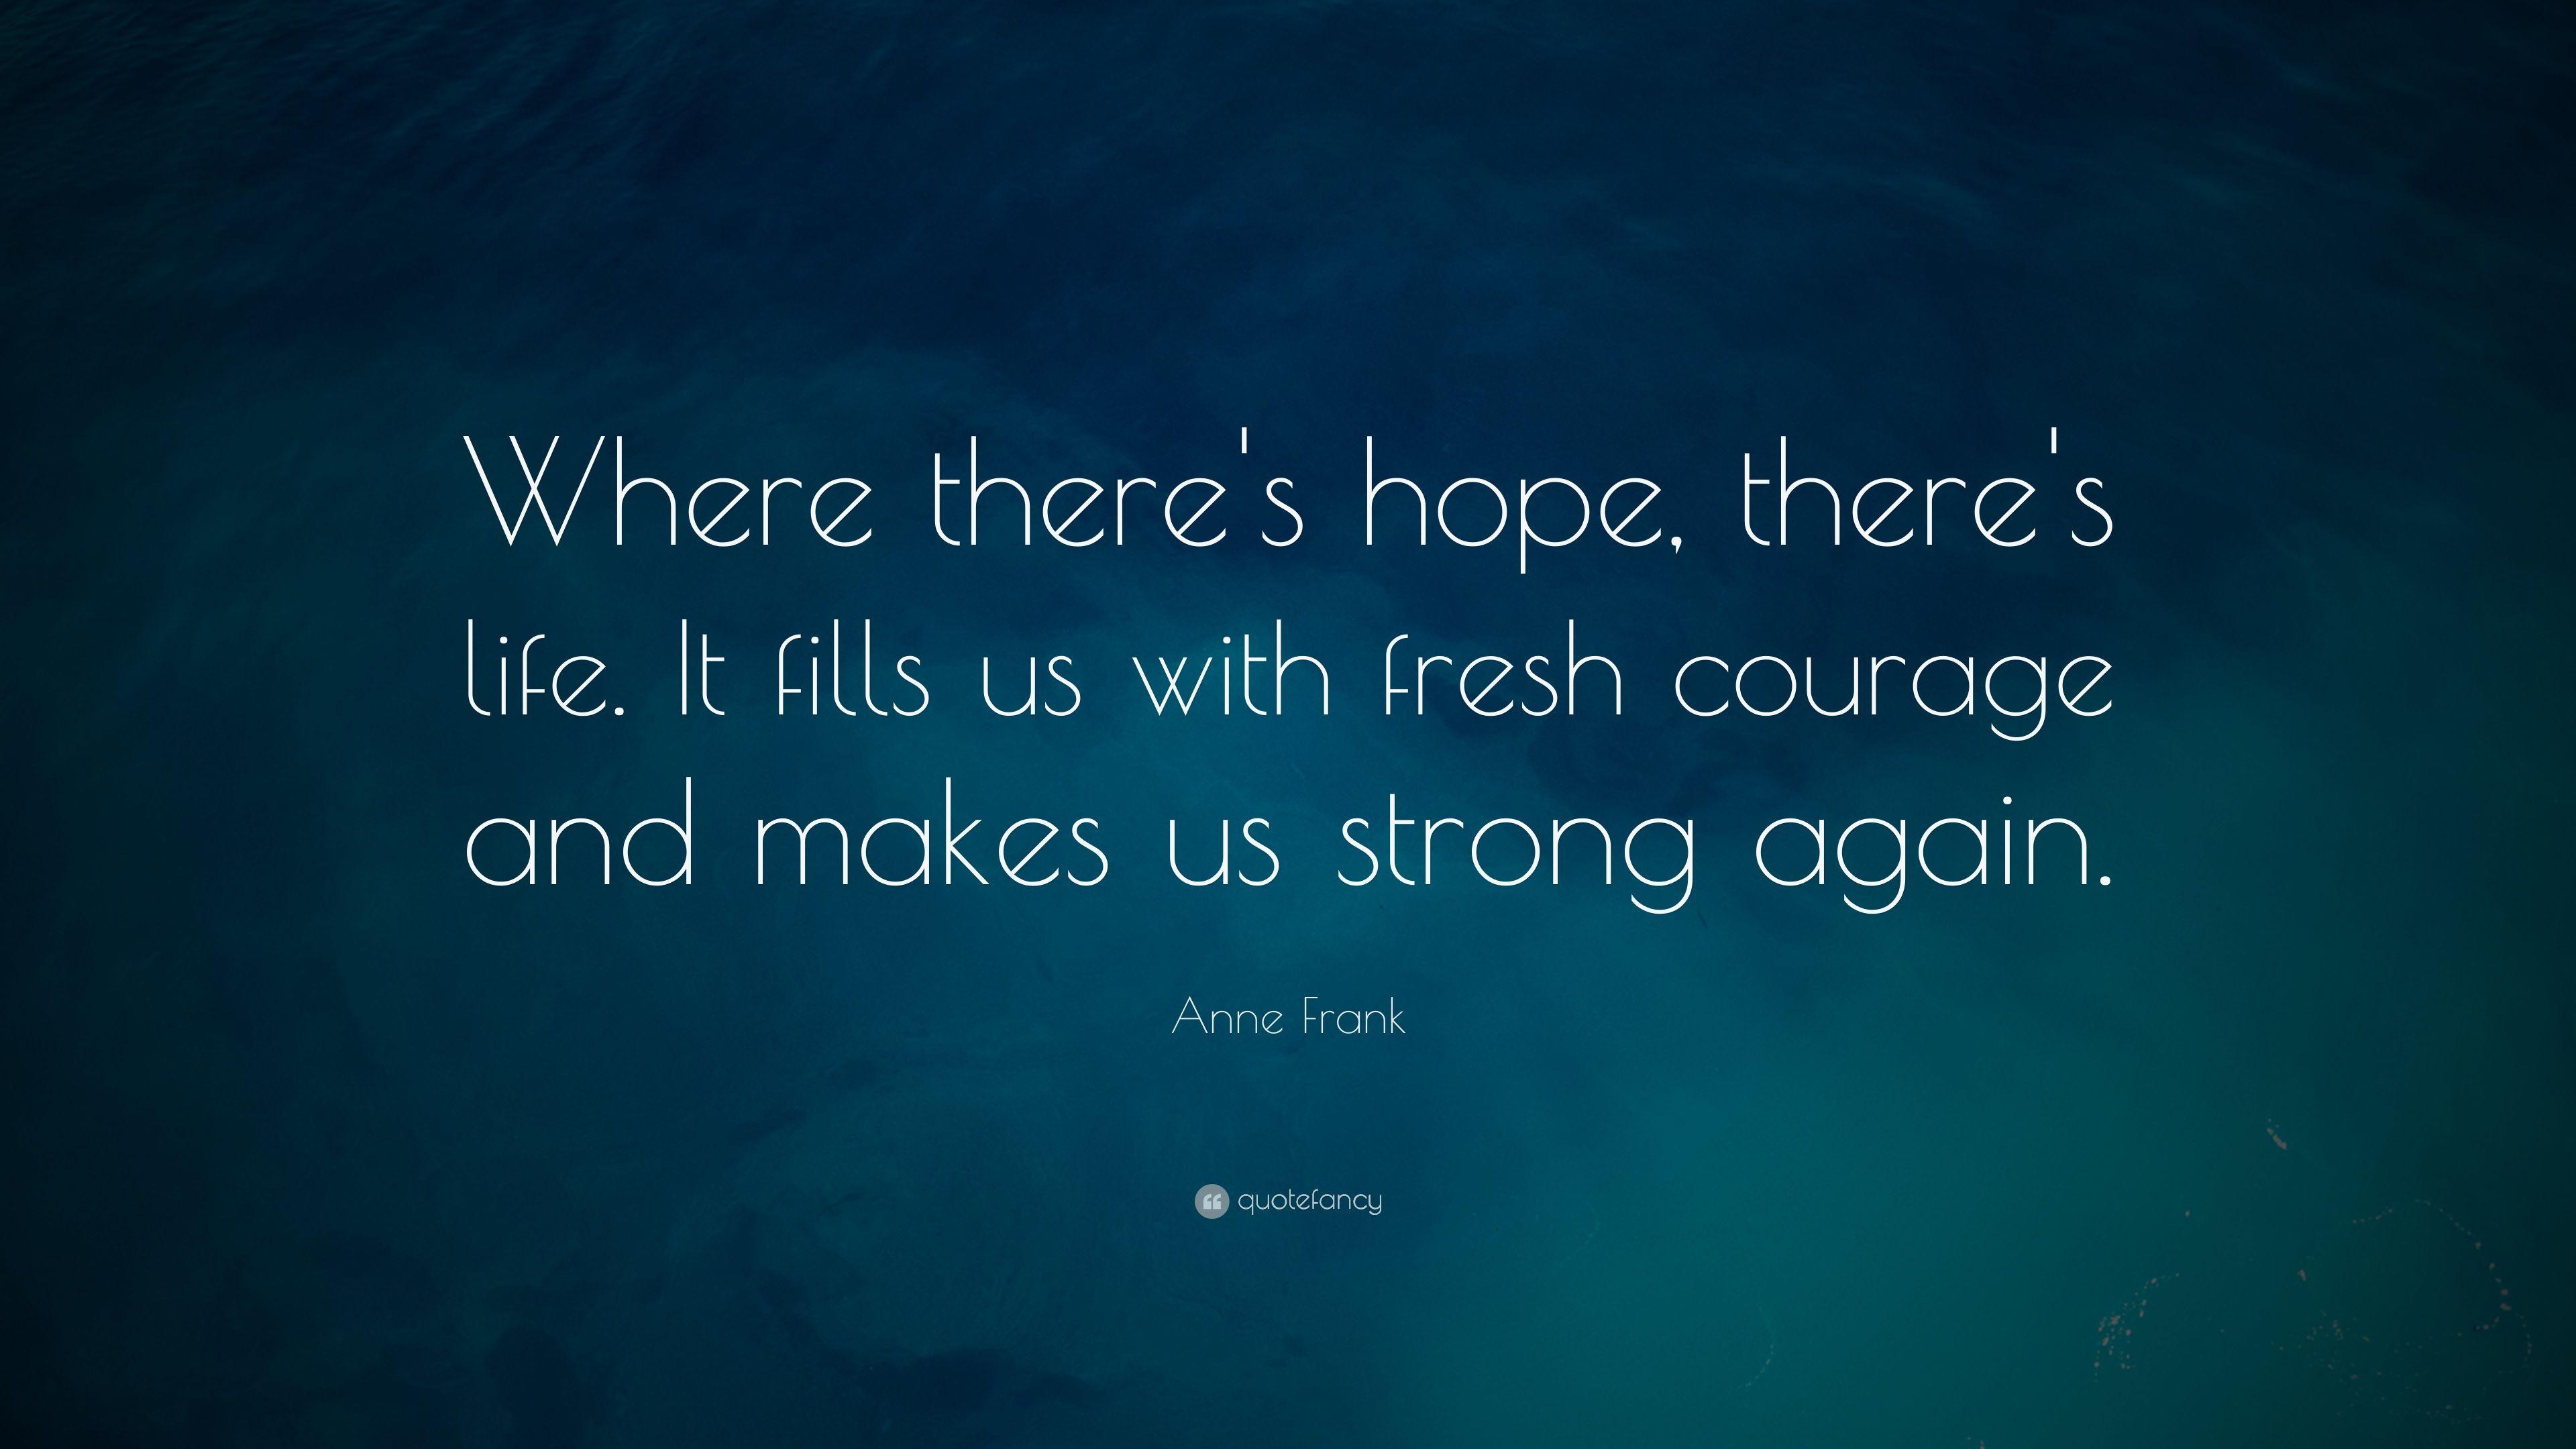 Anne Frank Quote: “Where there's hope, there's life. It fills us